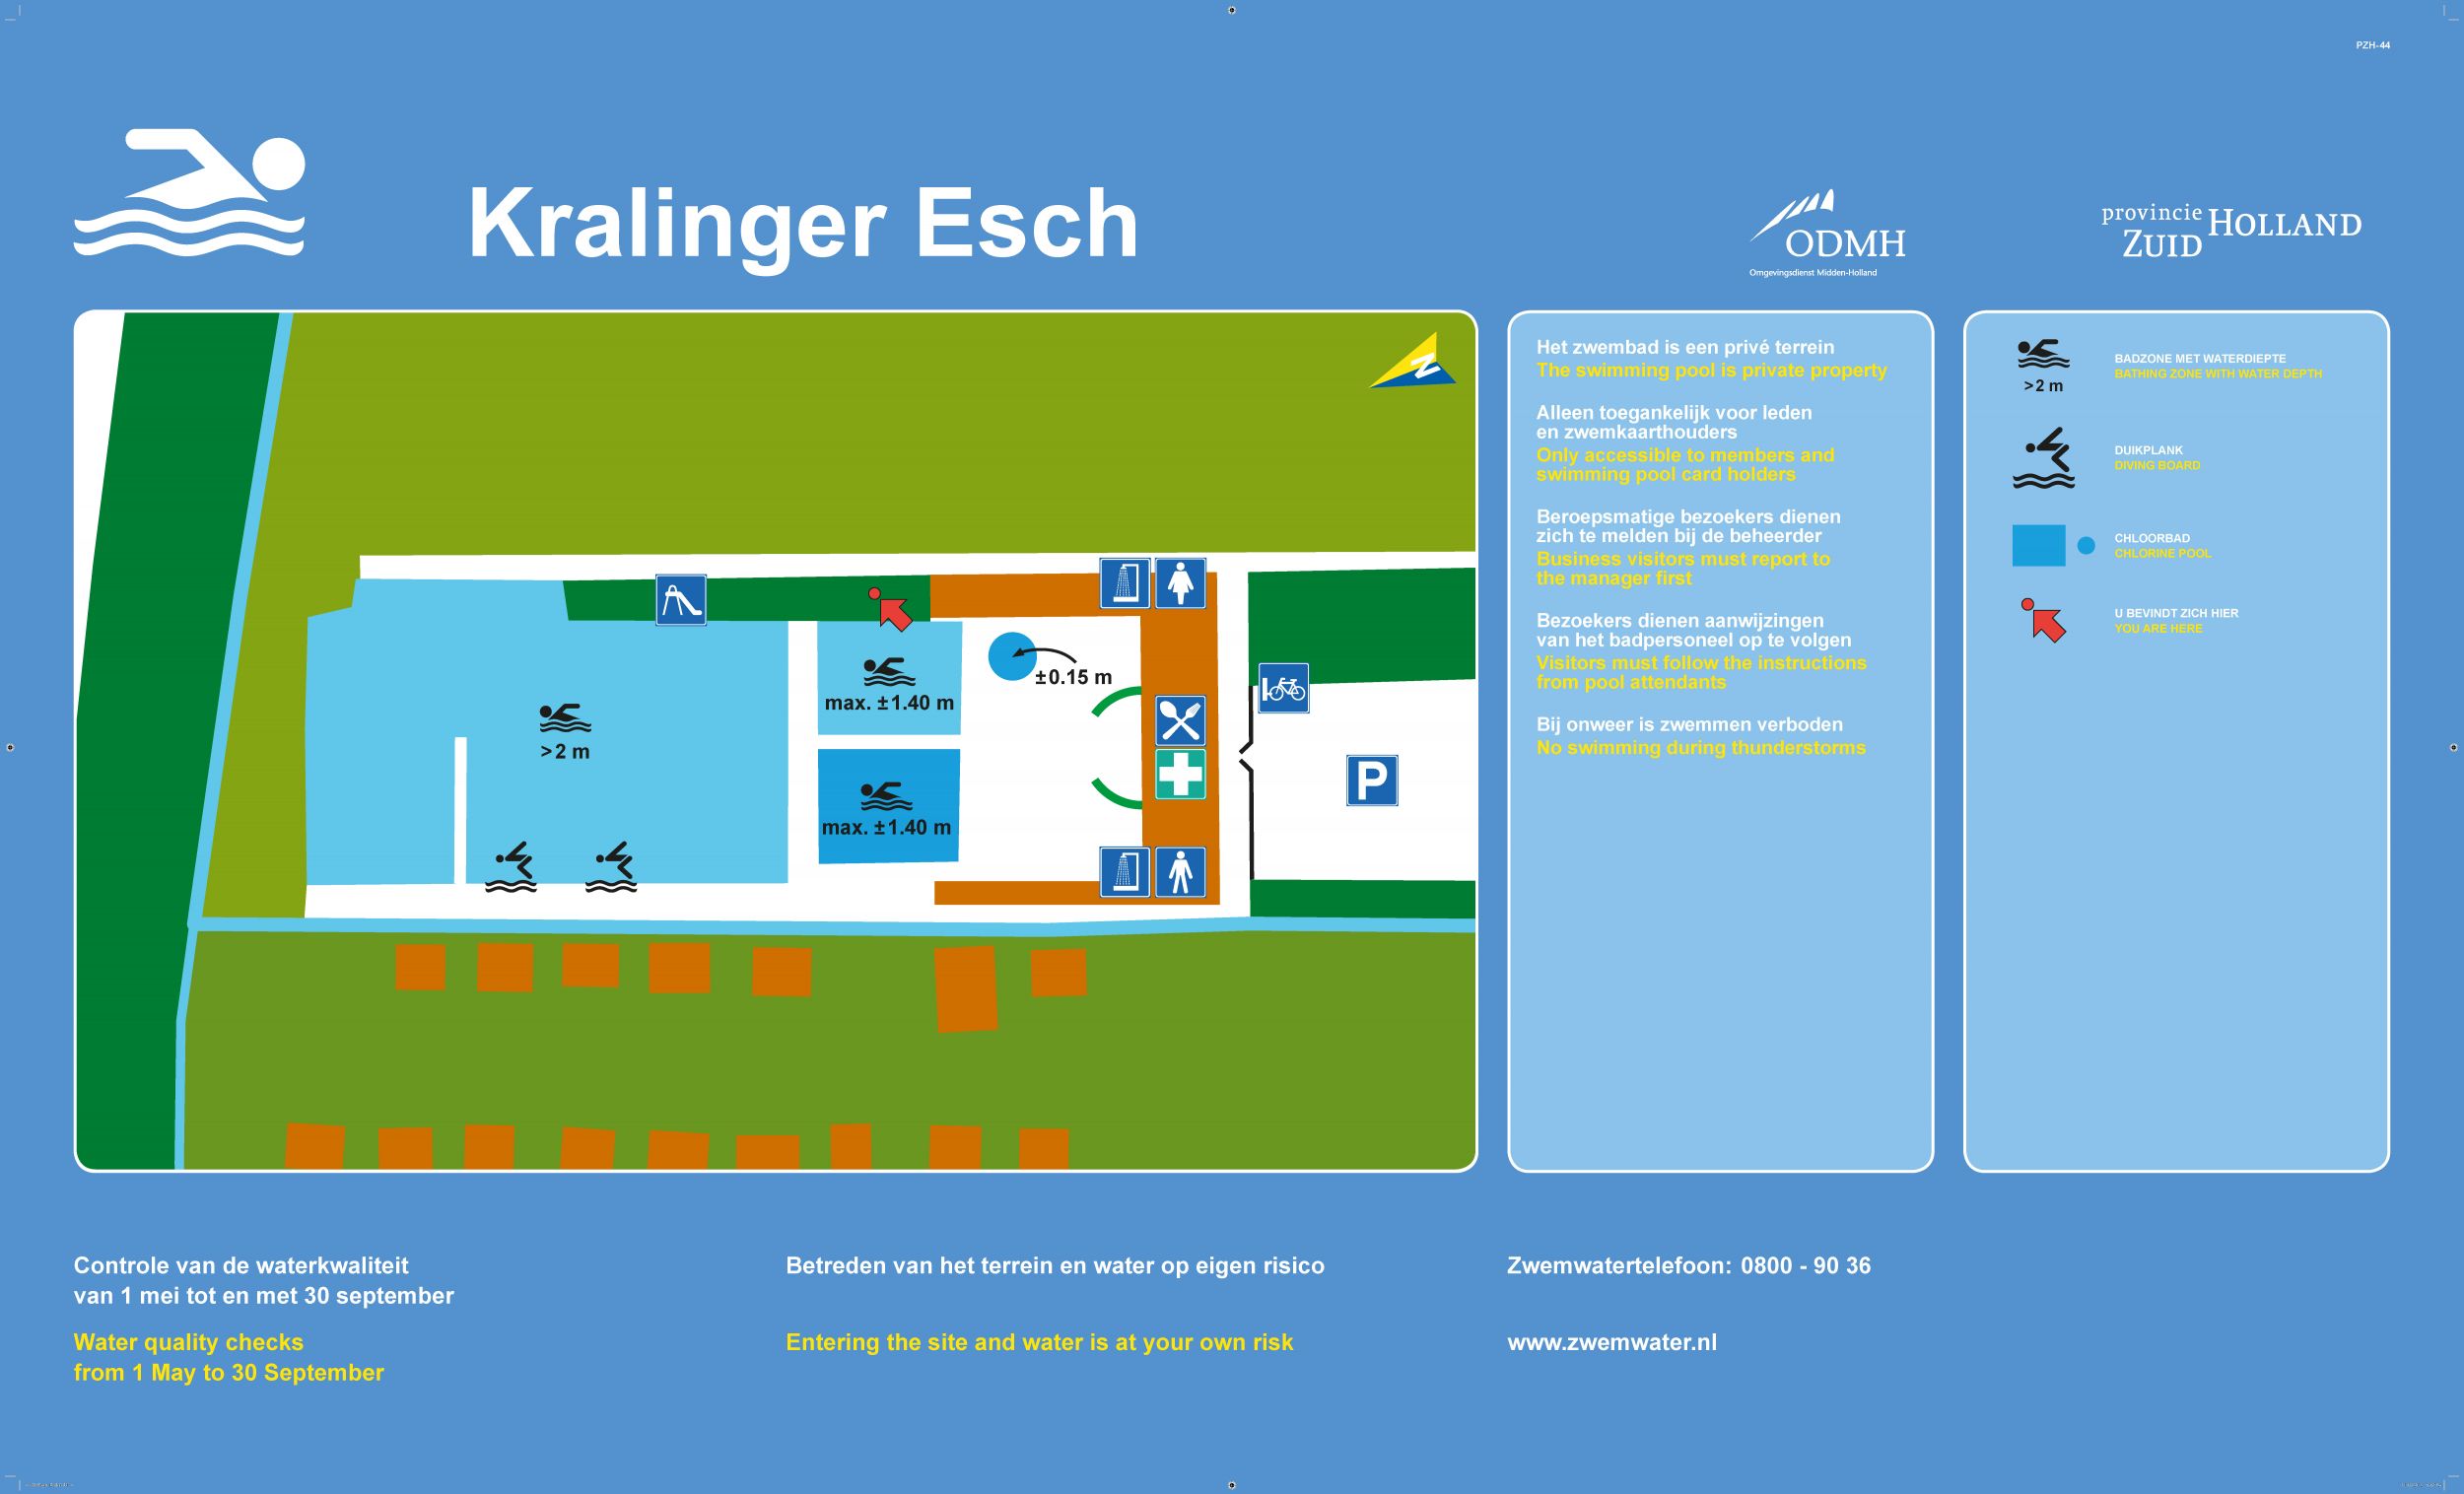 The information board at the swimming location Kralinger Esch